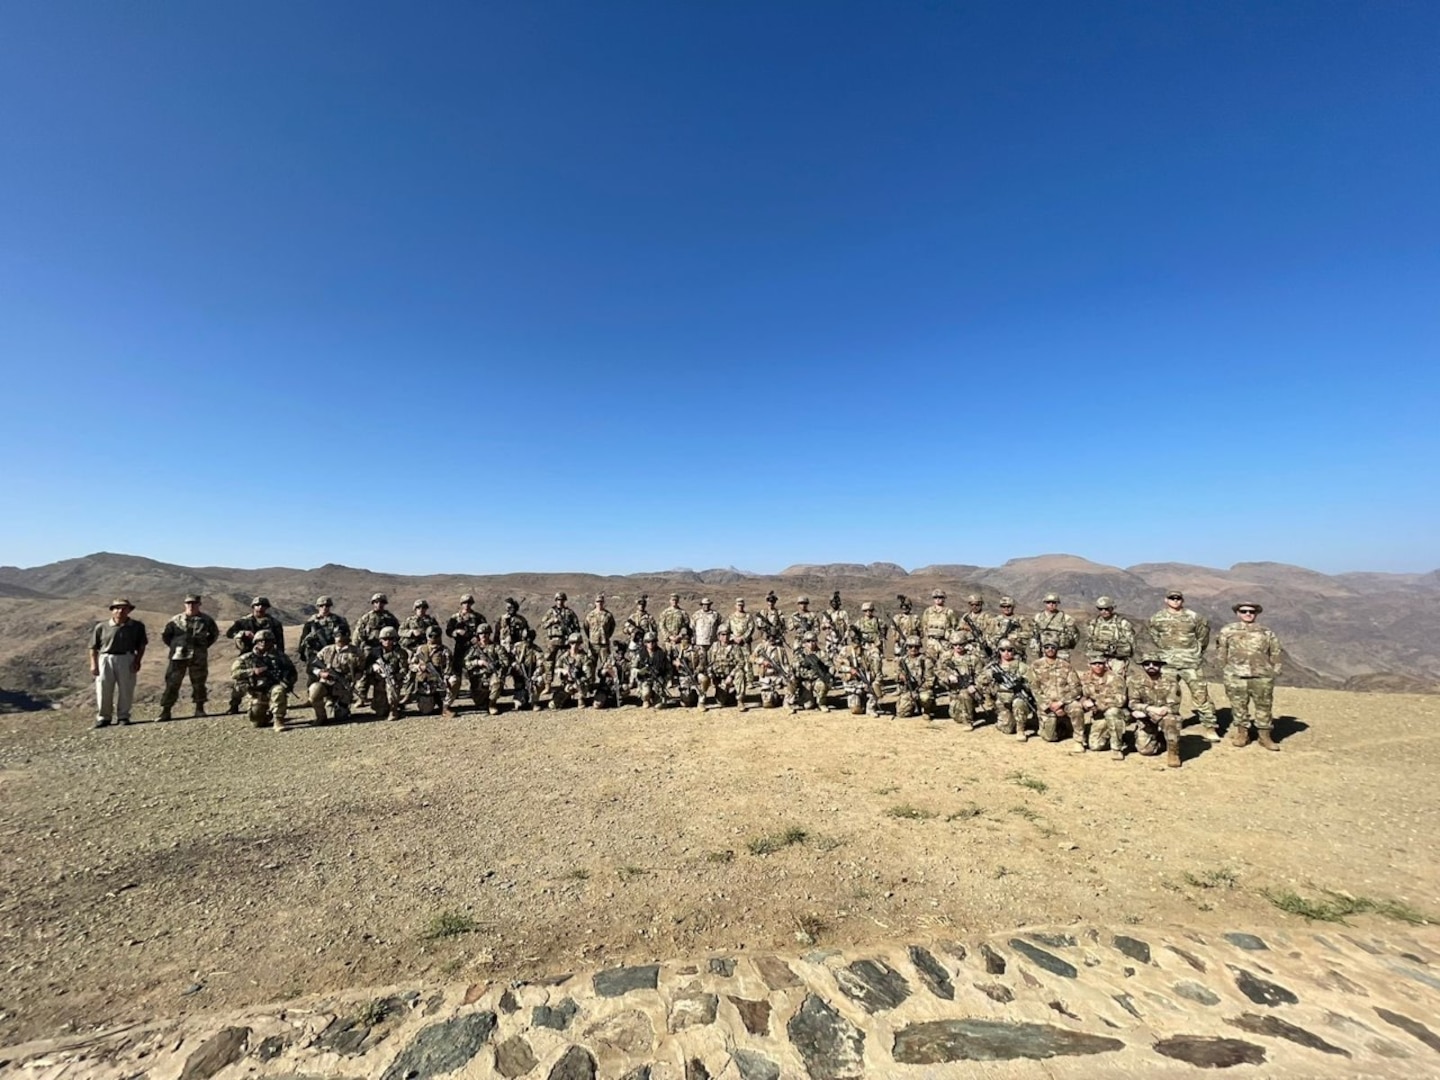 U.S. Army Soldiers from 3rd Battalion, 172 Infantry (Mountain) Headquarters Company and C Company, Vermont National Guard, conduct mountain training with Royal Saudi Land Forces Special Forces at the RSLF Mountain Warfare School in Saudi Arabia. Between October and November 2021, approximately 70 U.S. Army Soldiers attended the training. (Courtesy photo)